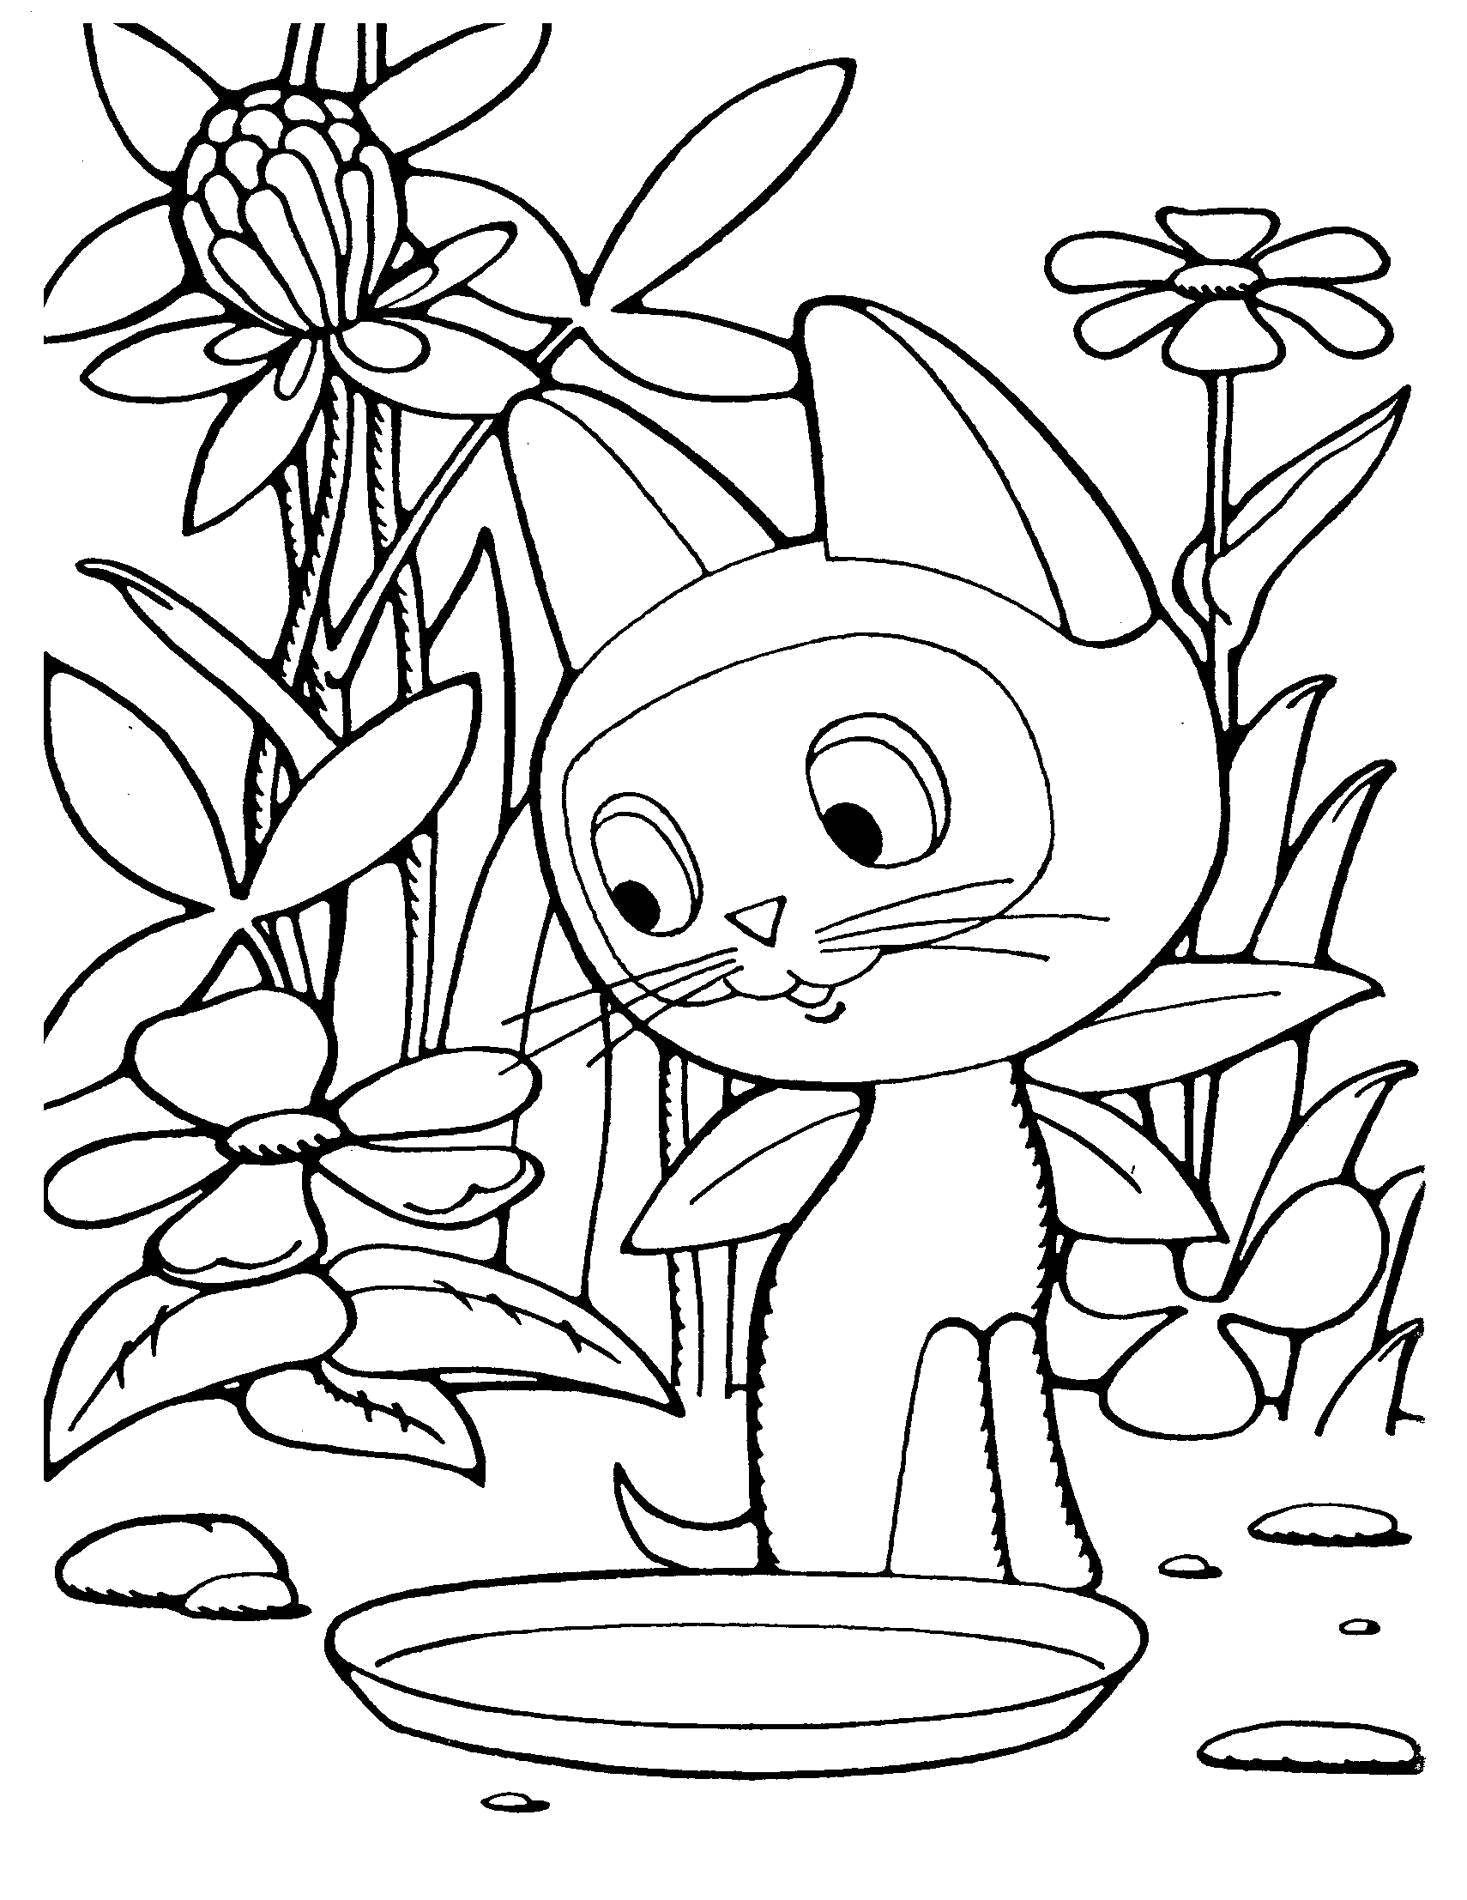 Coloring Kitten named woof . Category Cartoon character. Tags:  Cartoon character, kitten named woof .